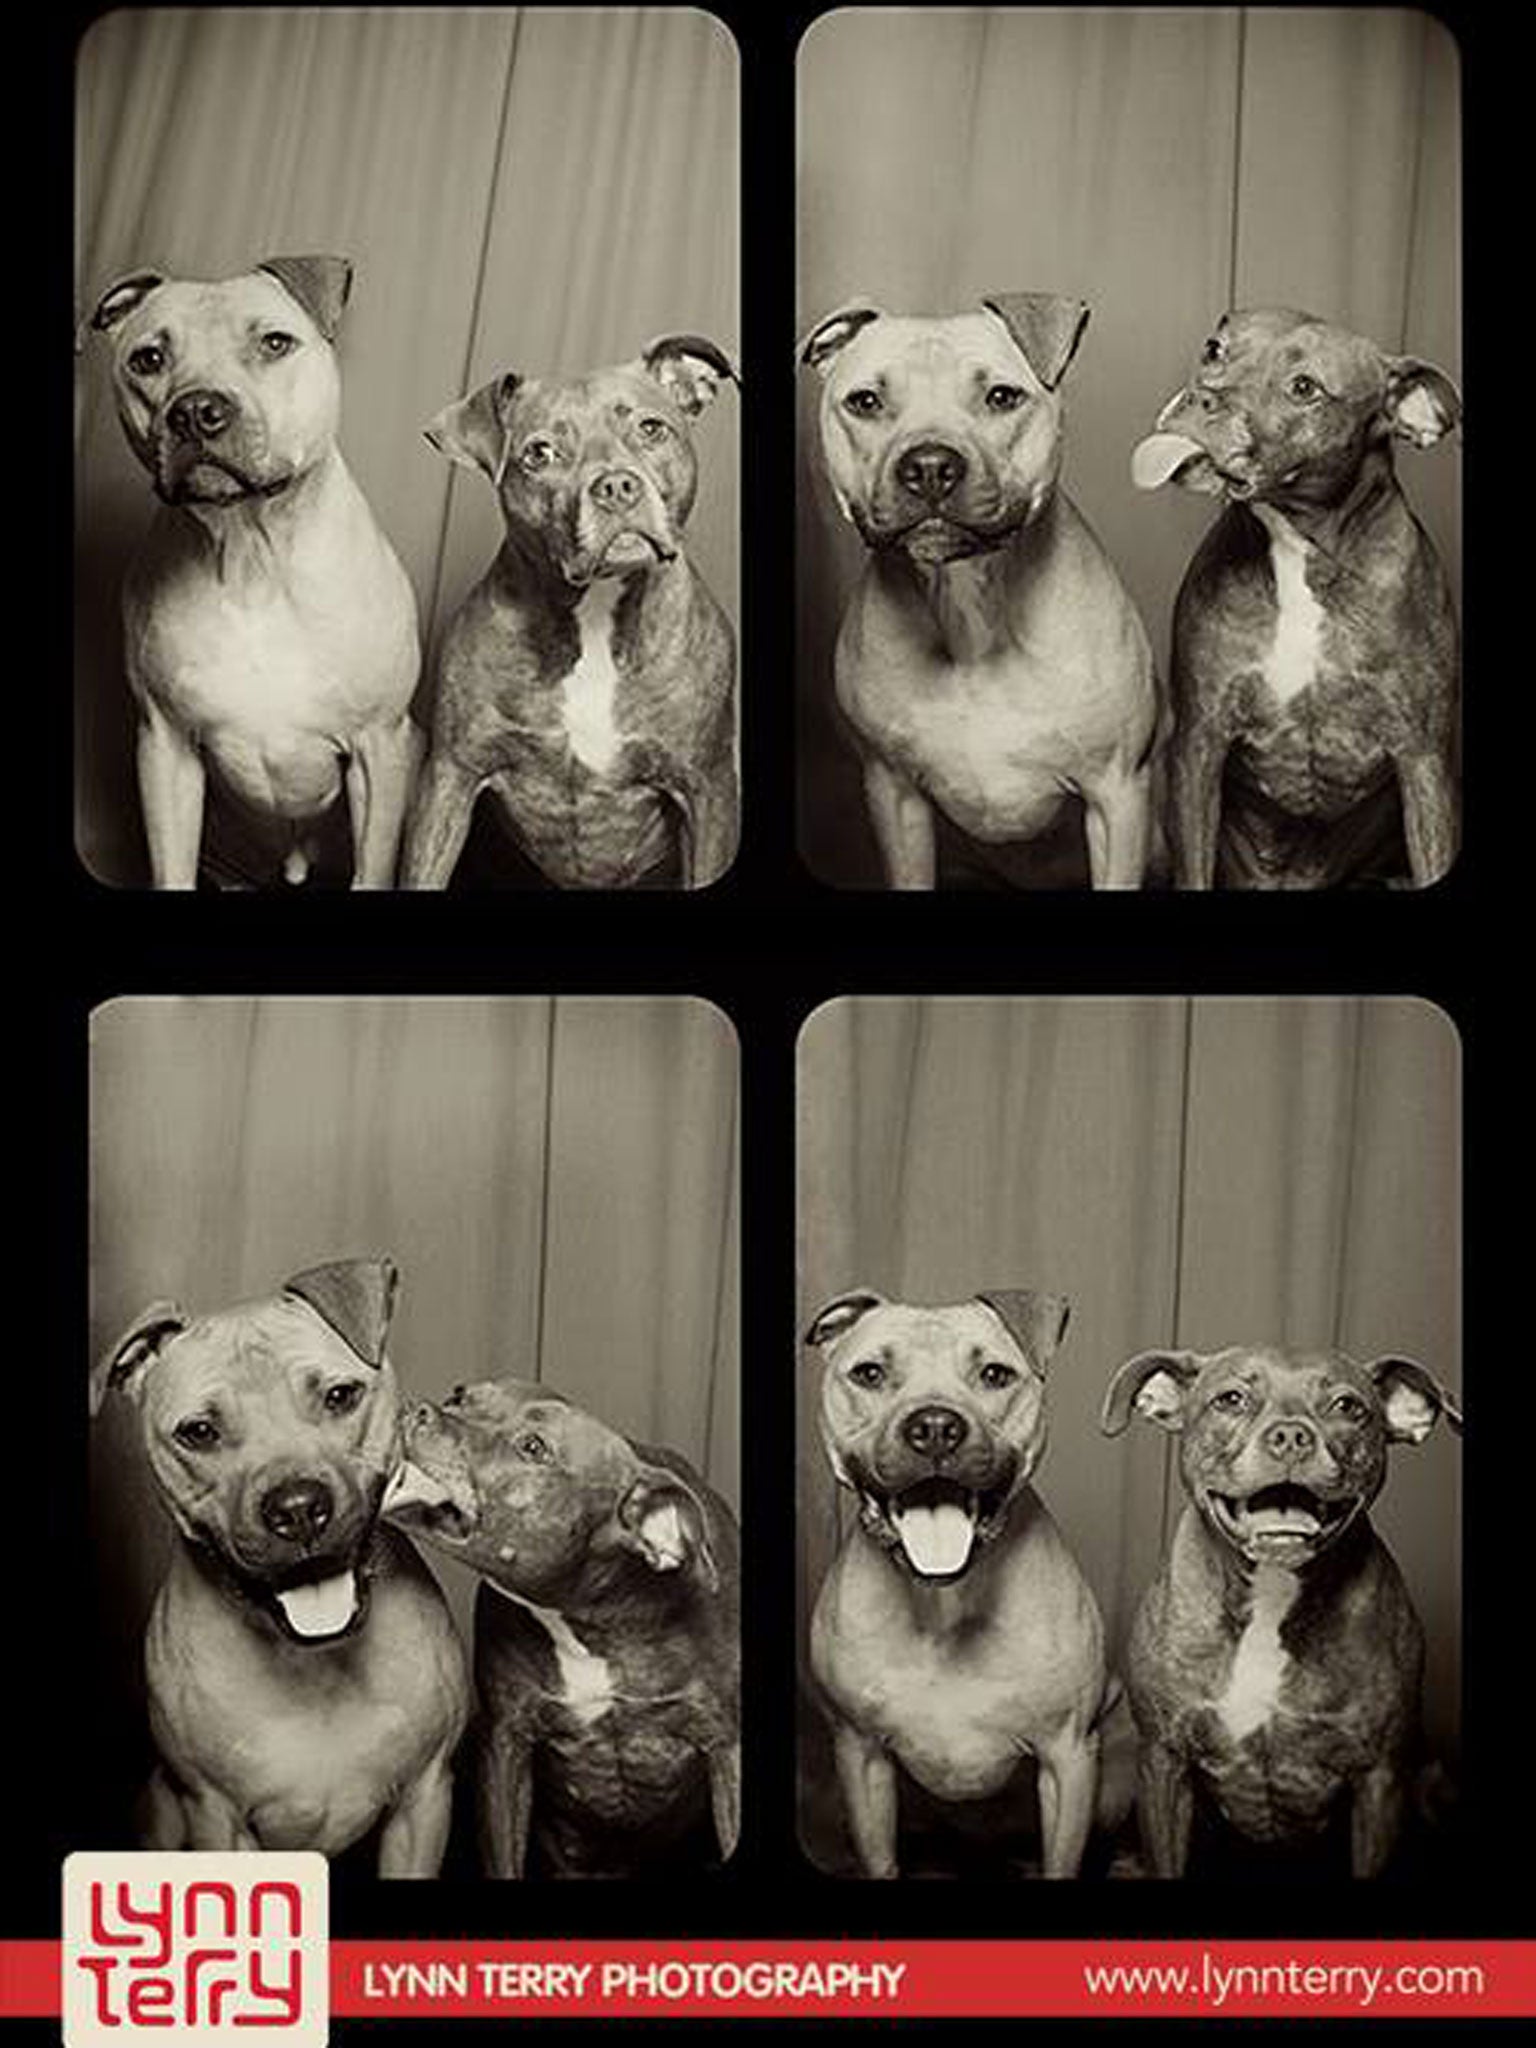 Willis (left) and Bumper (right) shine in front of the camera